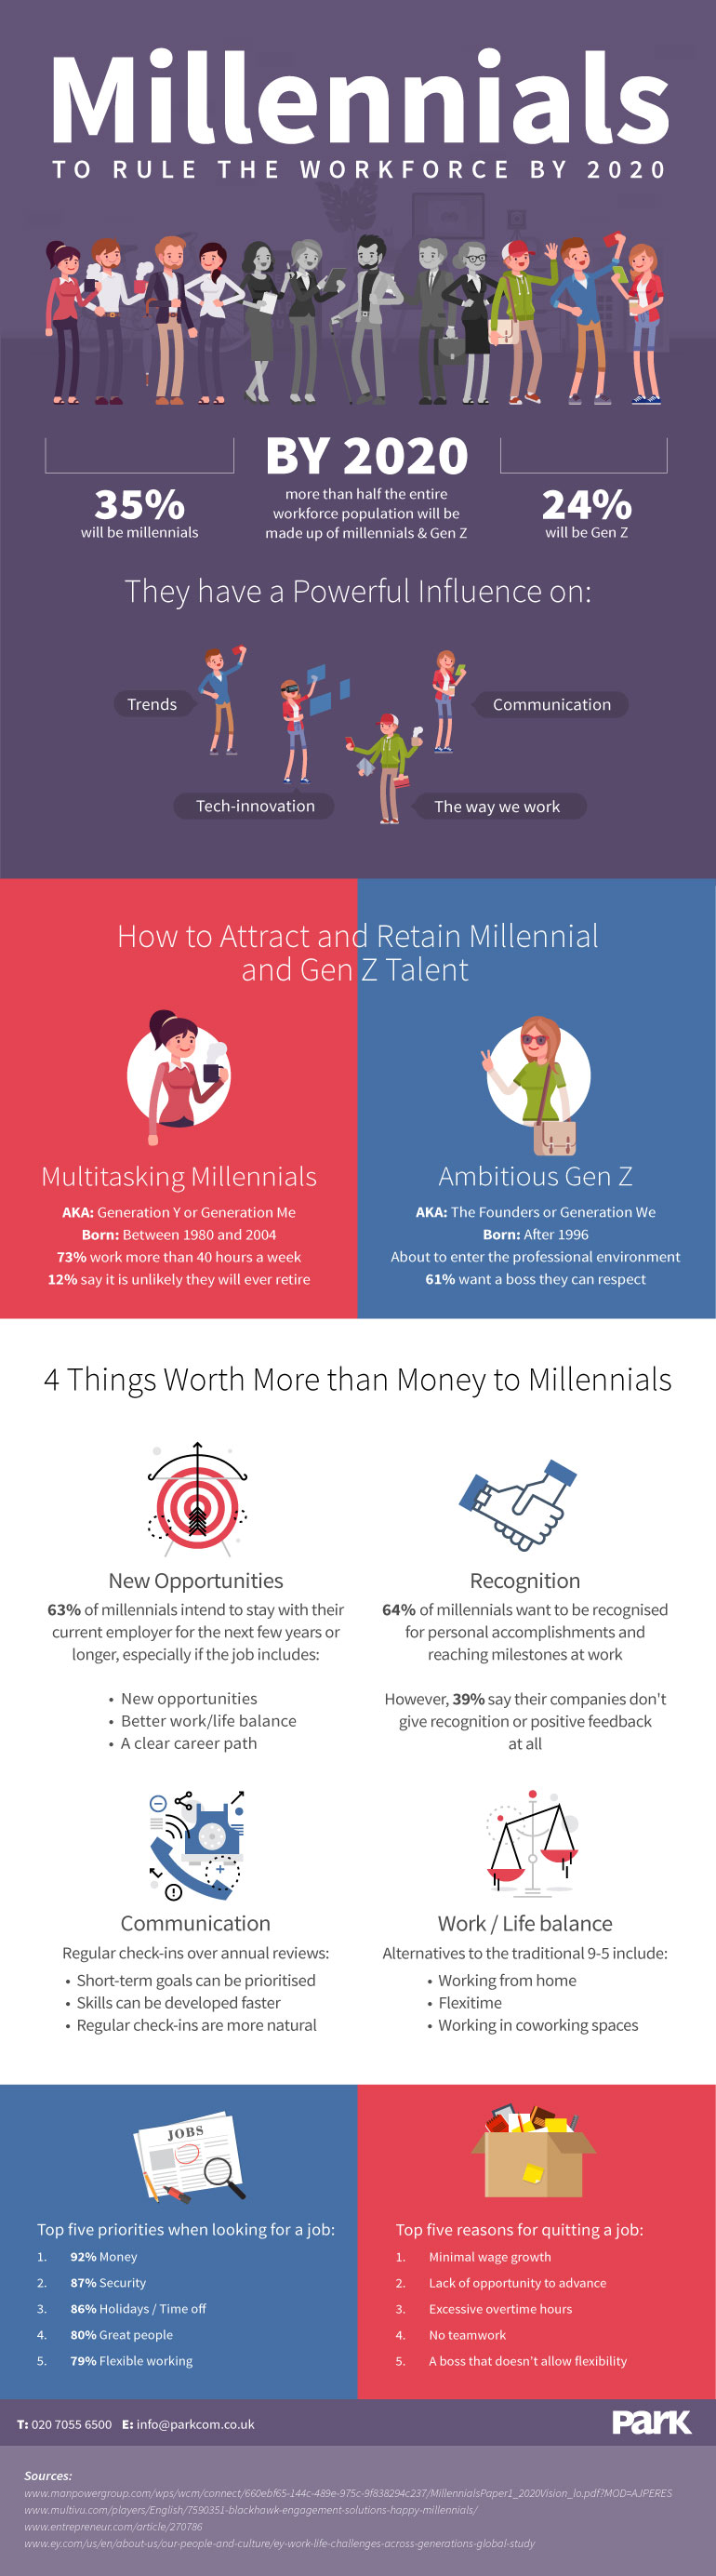 Millennials Are To Rule The Workforce By 2020 [Infographic]